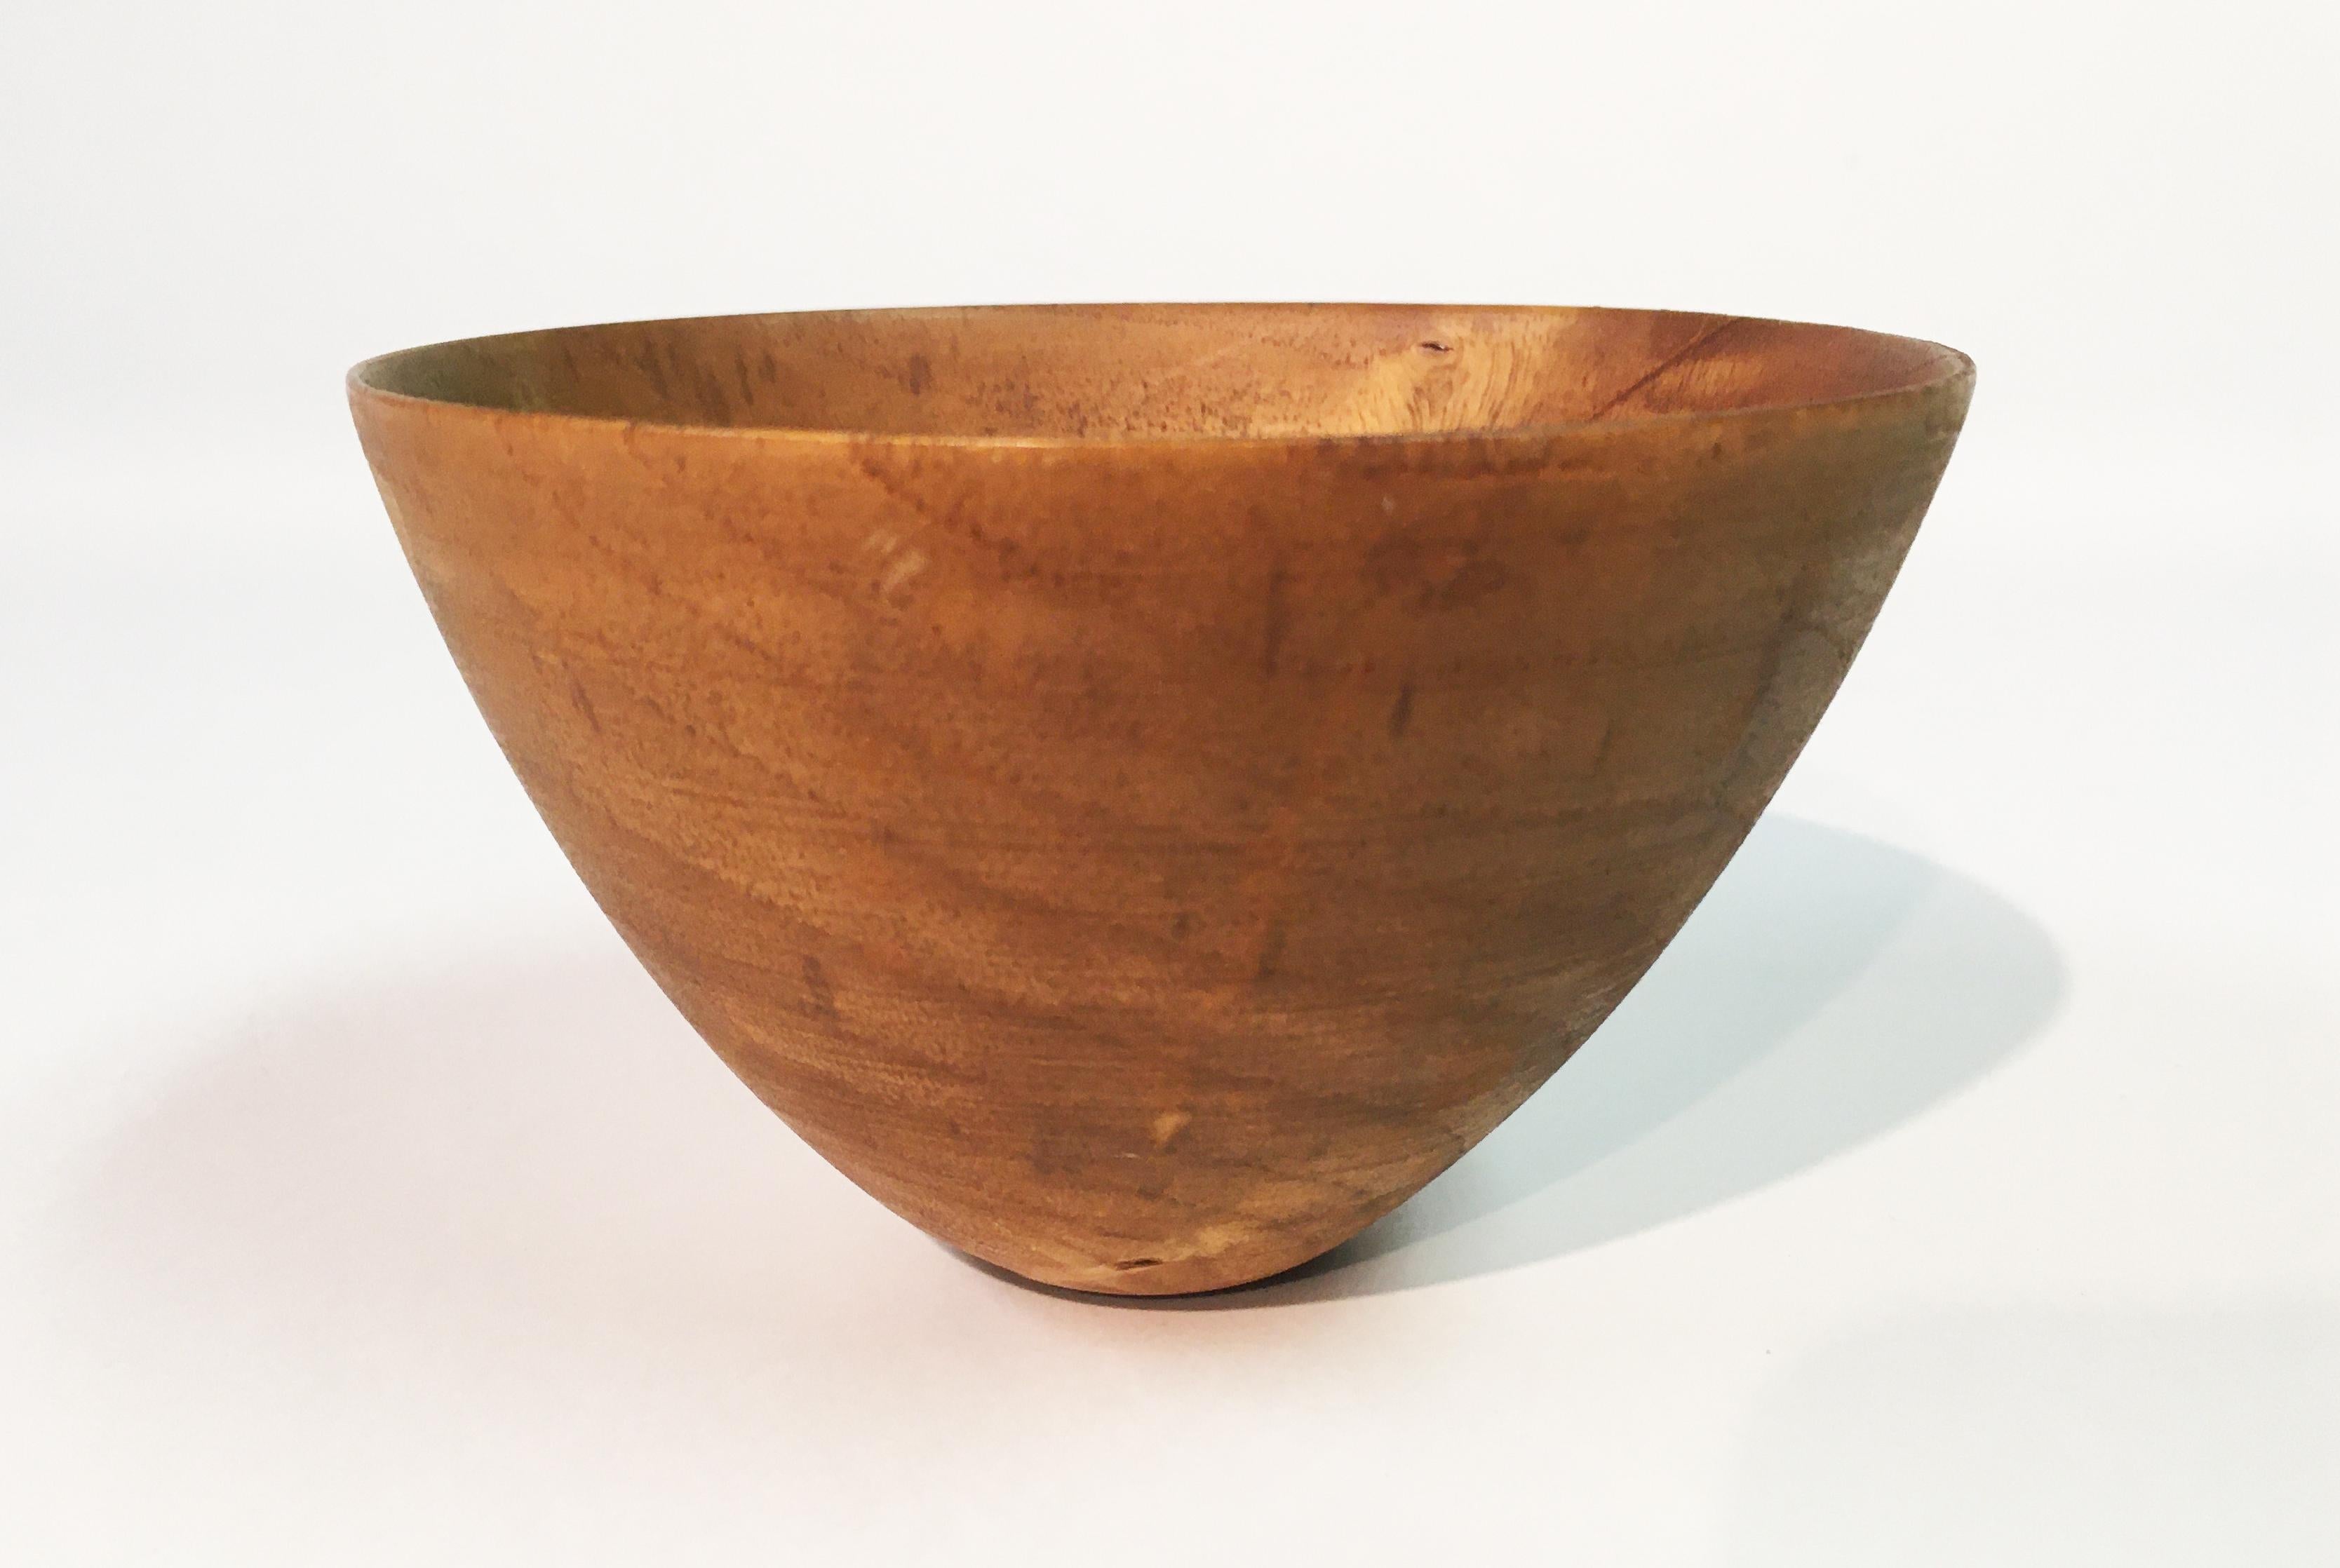 Trio of turned wood bowls by the internationally known American Sculptor, Designer and Craftsman, James L. Prestini, (1908-1993). Prestini’s masterful woodworking techniques were famous for rendering a most delicate porcelain like form, unsurpassed